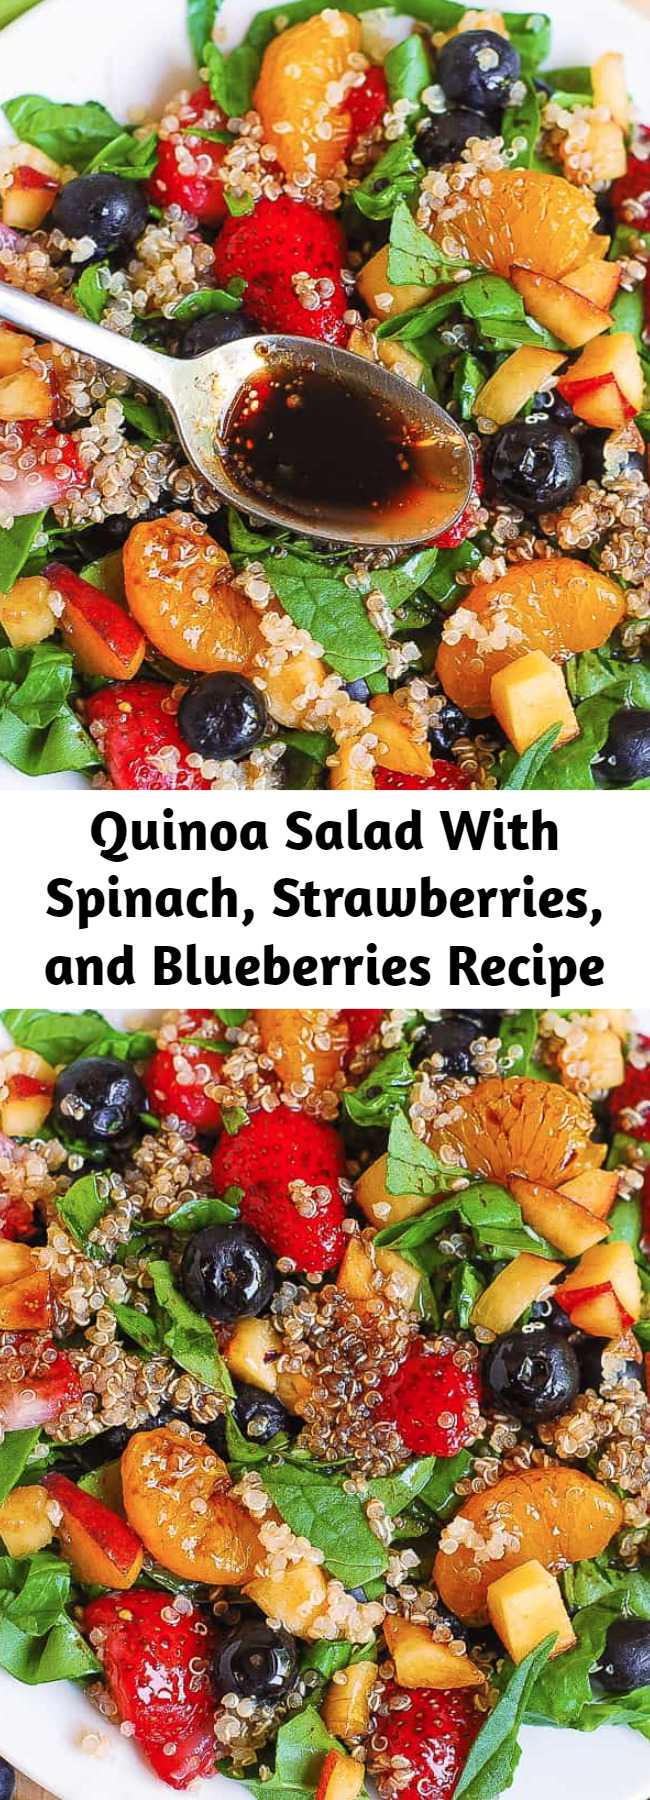 Quinoa Salad With Spinach, Strawberries, and Blueberries Recipe - Delicious Summer salad: Quinoa salad with spinach, strawberries, blueberries, peaches, mandarin oranges in a homemade Balsamic vinaigrette dressing. The dressing is made from scratch, using olive oil, balsamic vinegar, brown sugar, mustard powder, onion and garlic powders. This healthy quinoa salad is gluten free, dairy free, vegan, nut free, packed with fiber and nutrients.